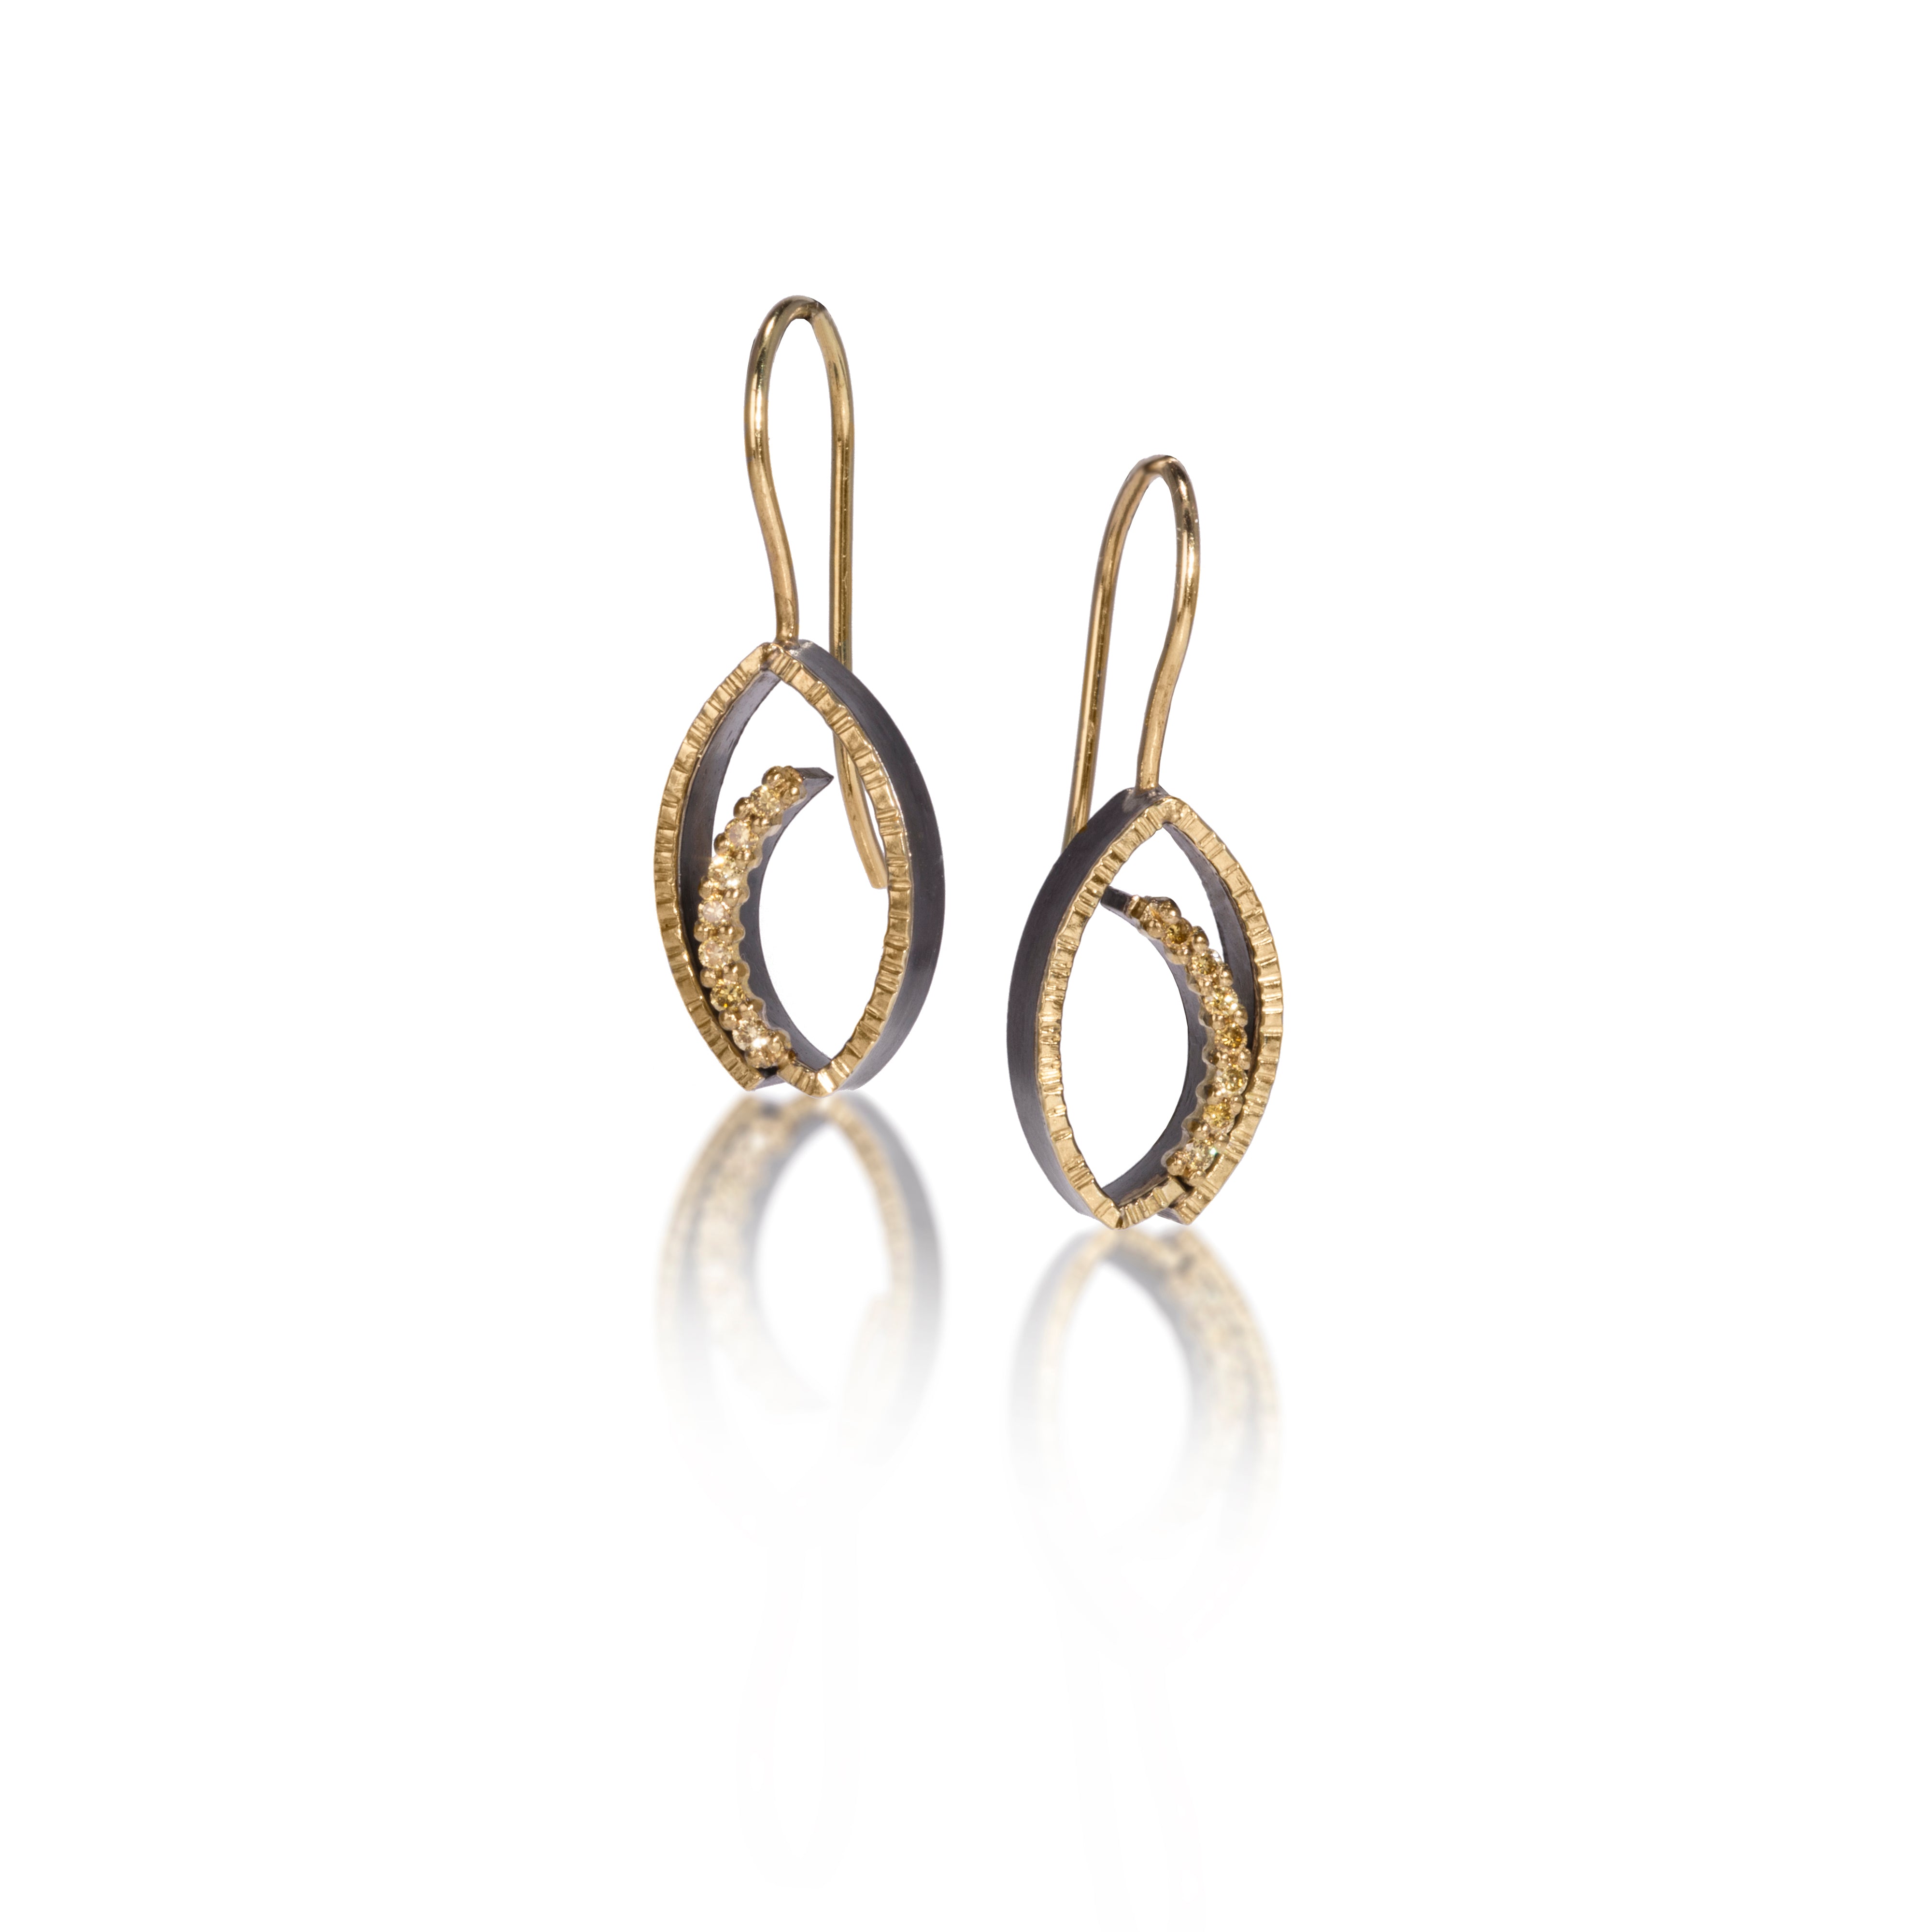 Tempest Earring #3, size small in 18k gold and oxidized sterling silver with prong set natural yellow diamonds. 18k earwire with closure. Forged, textured and fabricated by hand. 0.1008 tcw.